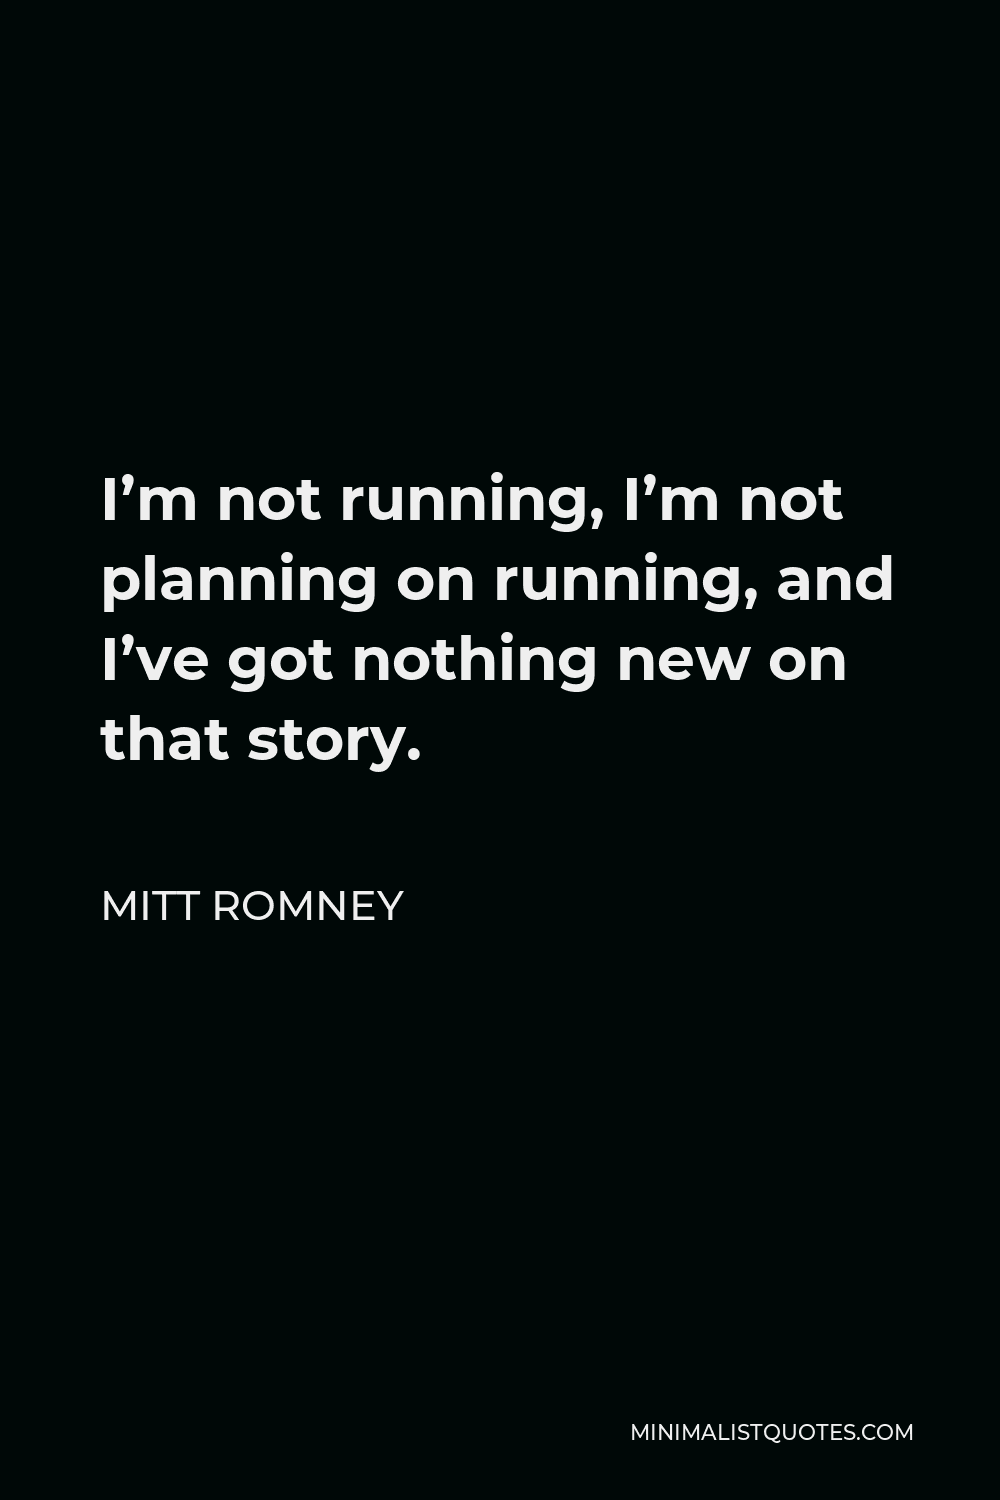 Mitt Romney Quote - I’m not running, I’m not planning on running, and I’ve got nothing new on that story.